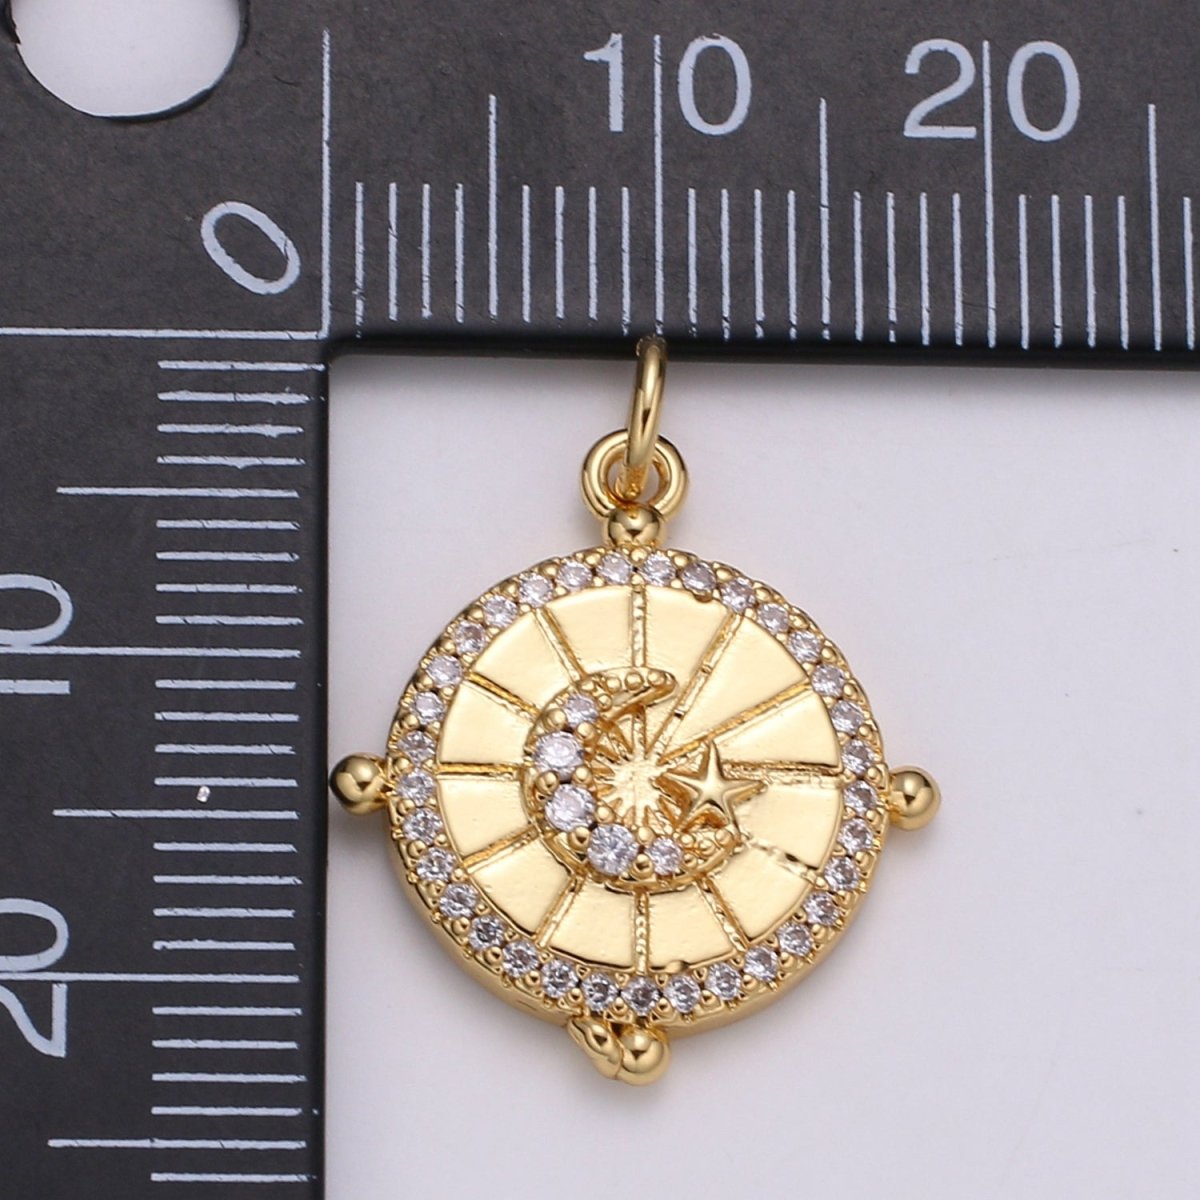 Dainty Crescent Moon Pendant Gold Filled Celstial Star Charm Minimalist Crystal Coin Medallion Pendant for Necklace Earring Supply E-165 - DLUXCA